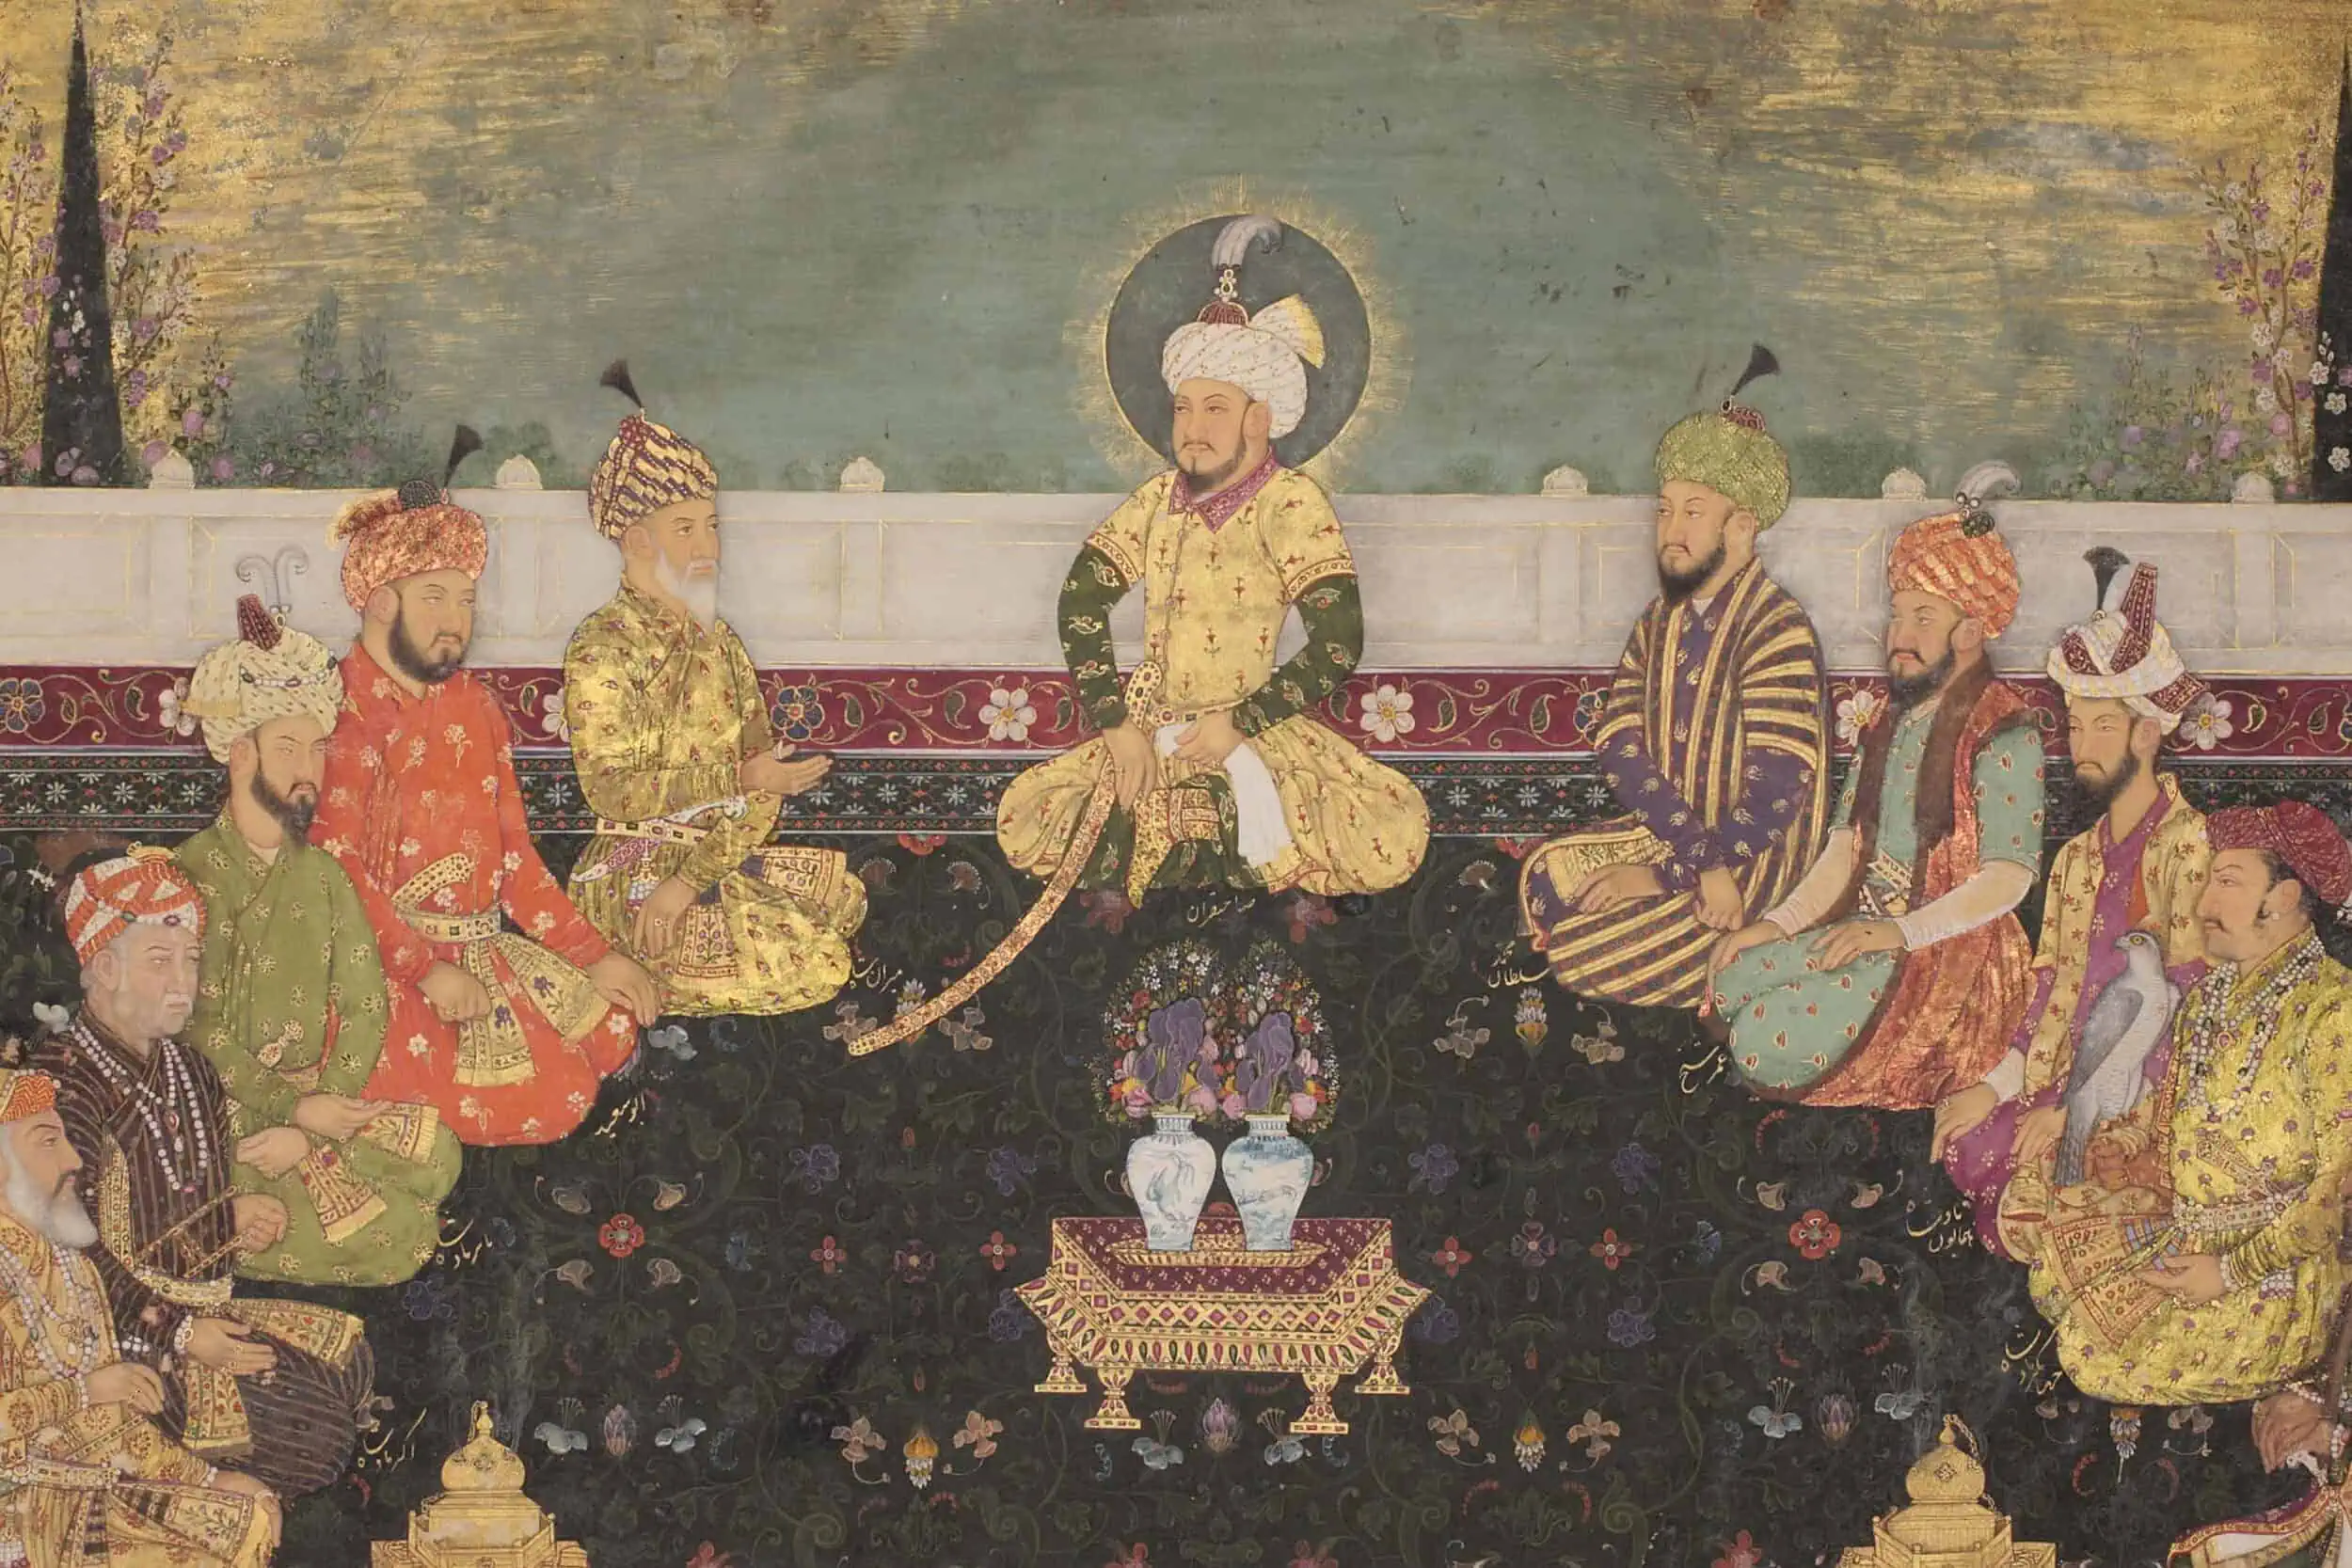 Period illustration of Mughal rulers